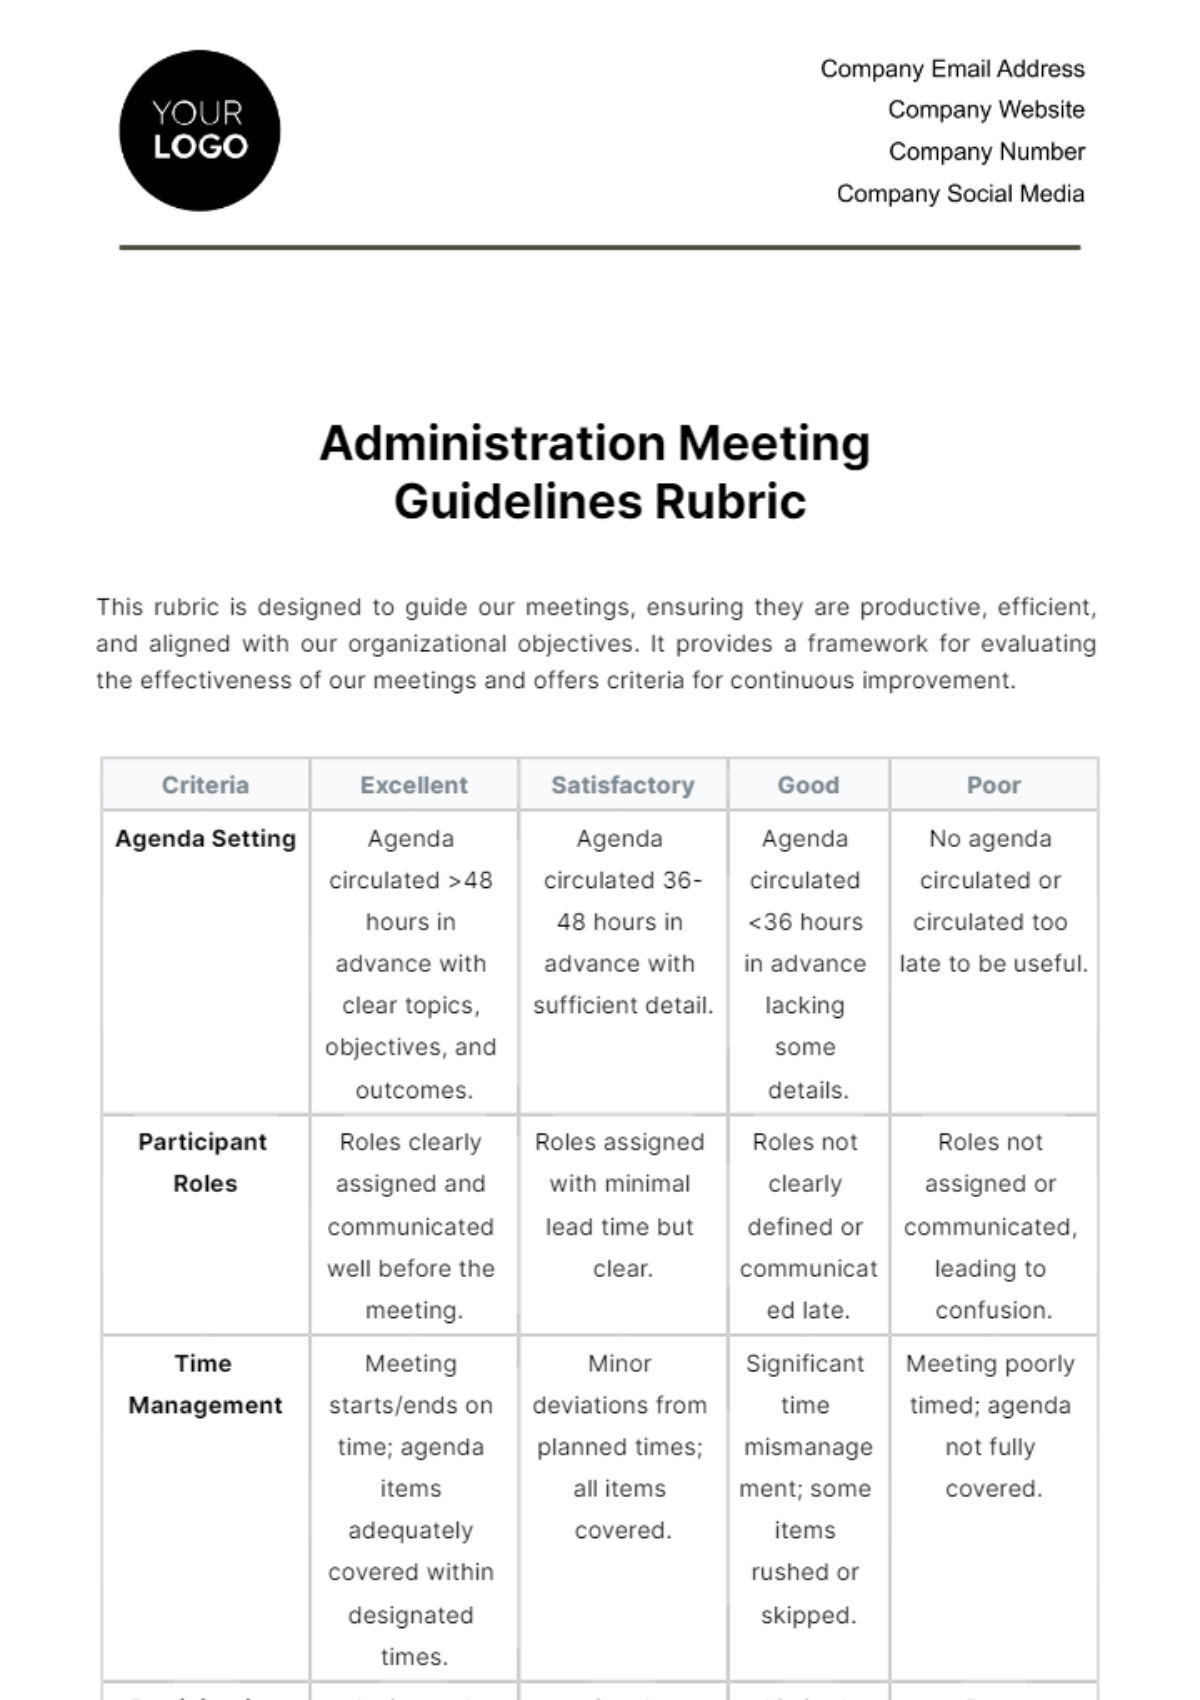 Administration Meeting Guidelines Rubric Template